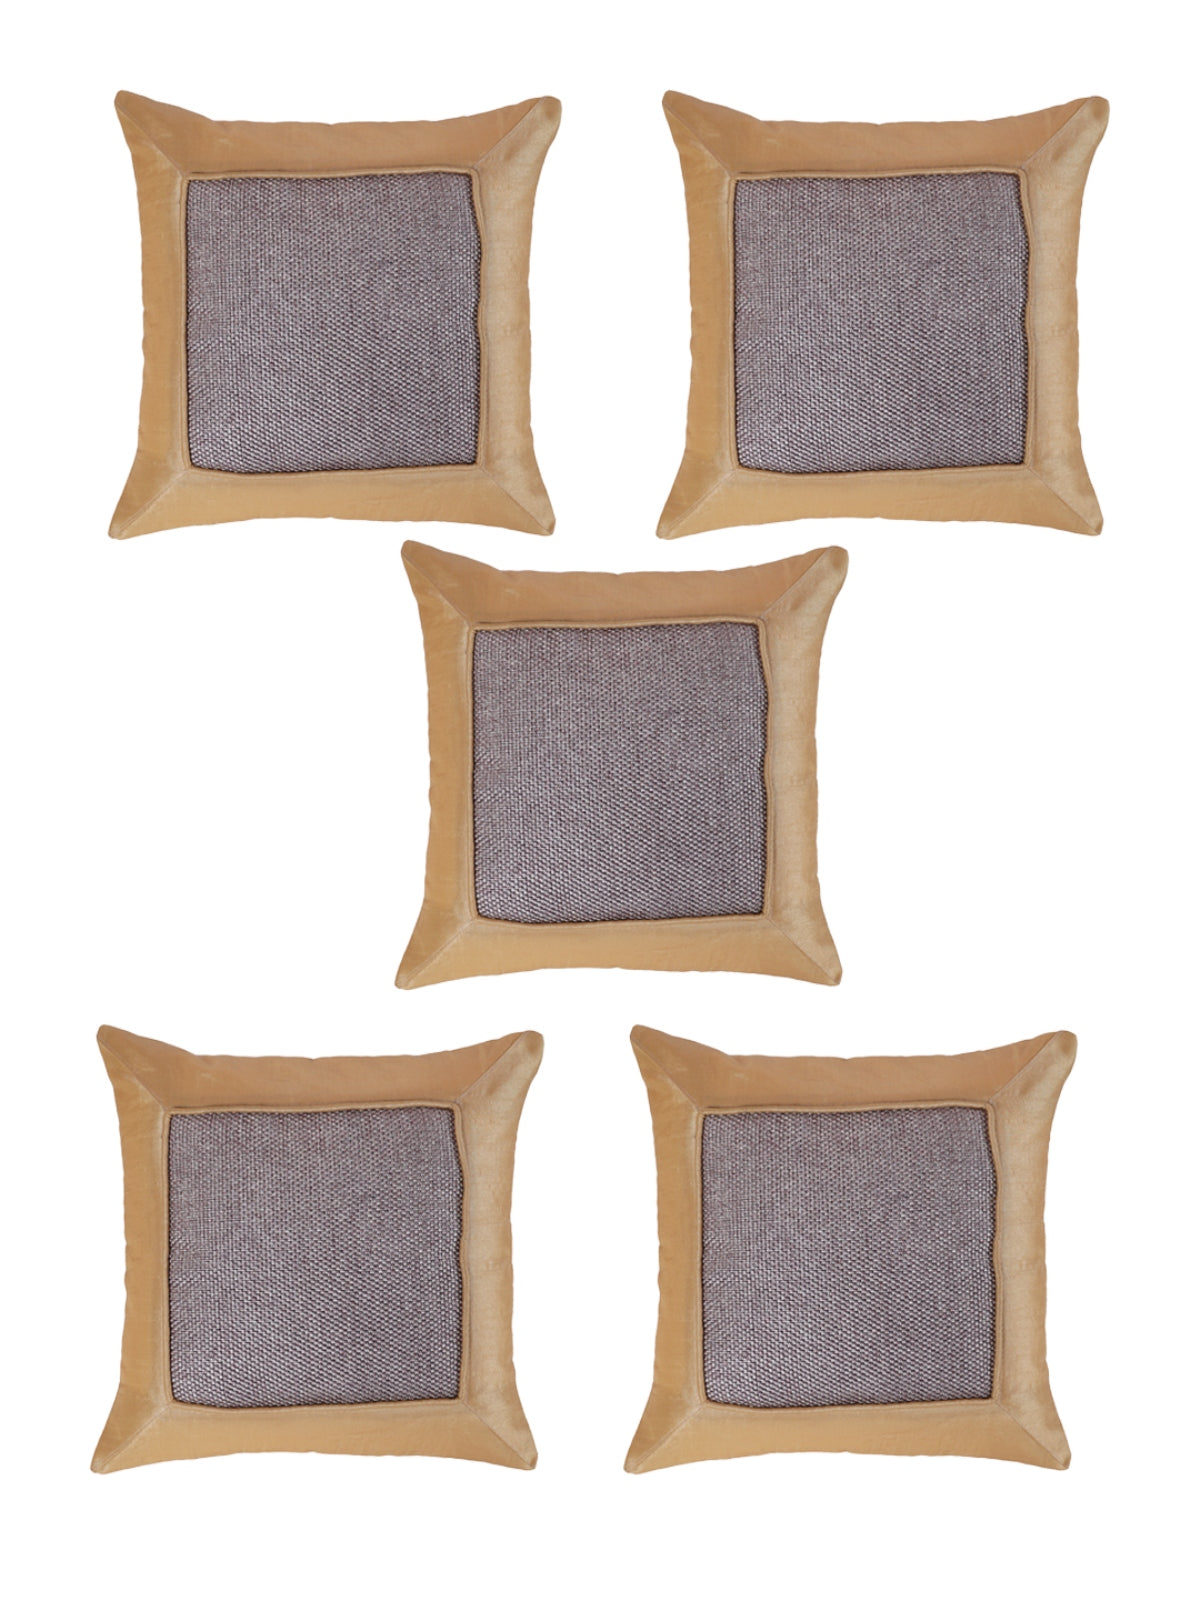 Geometric Printed Polyester Cushion Cover Set of 5 - Silver & Beige